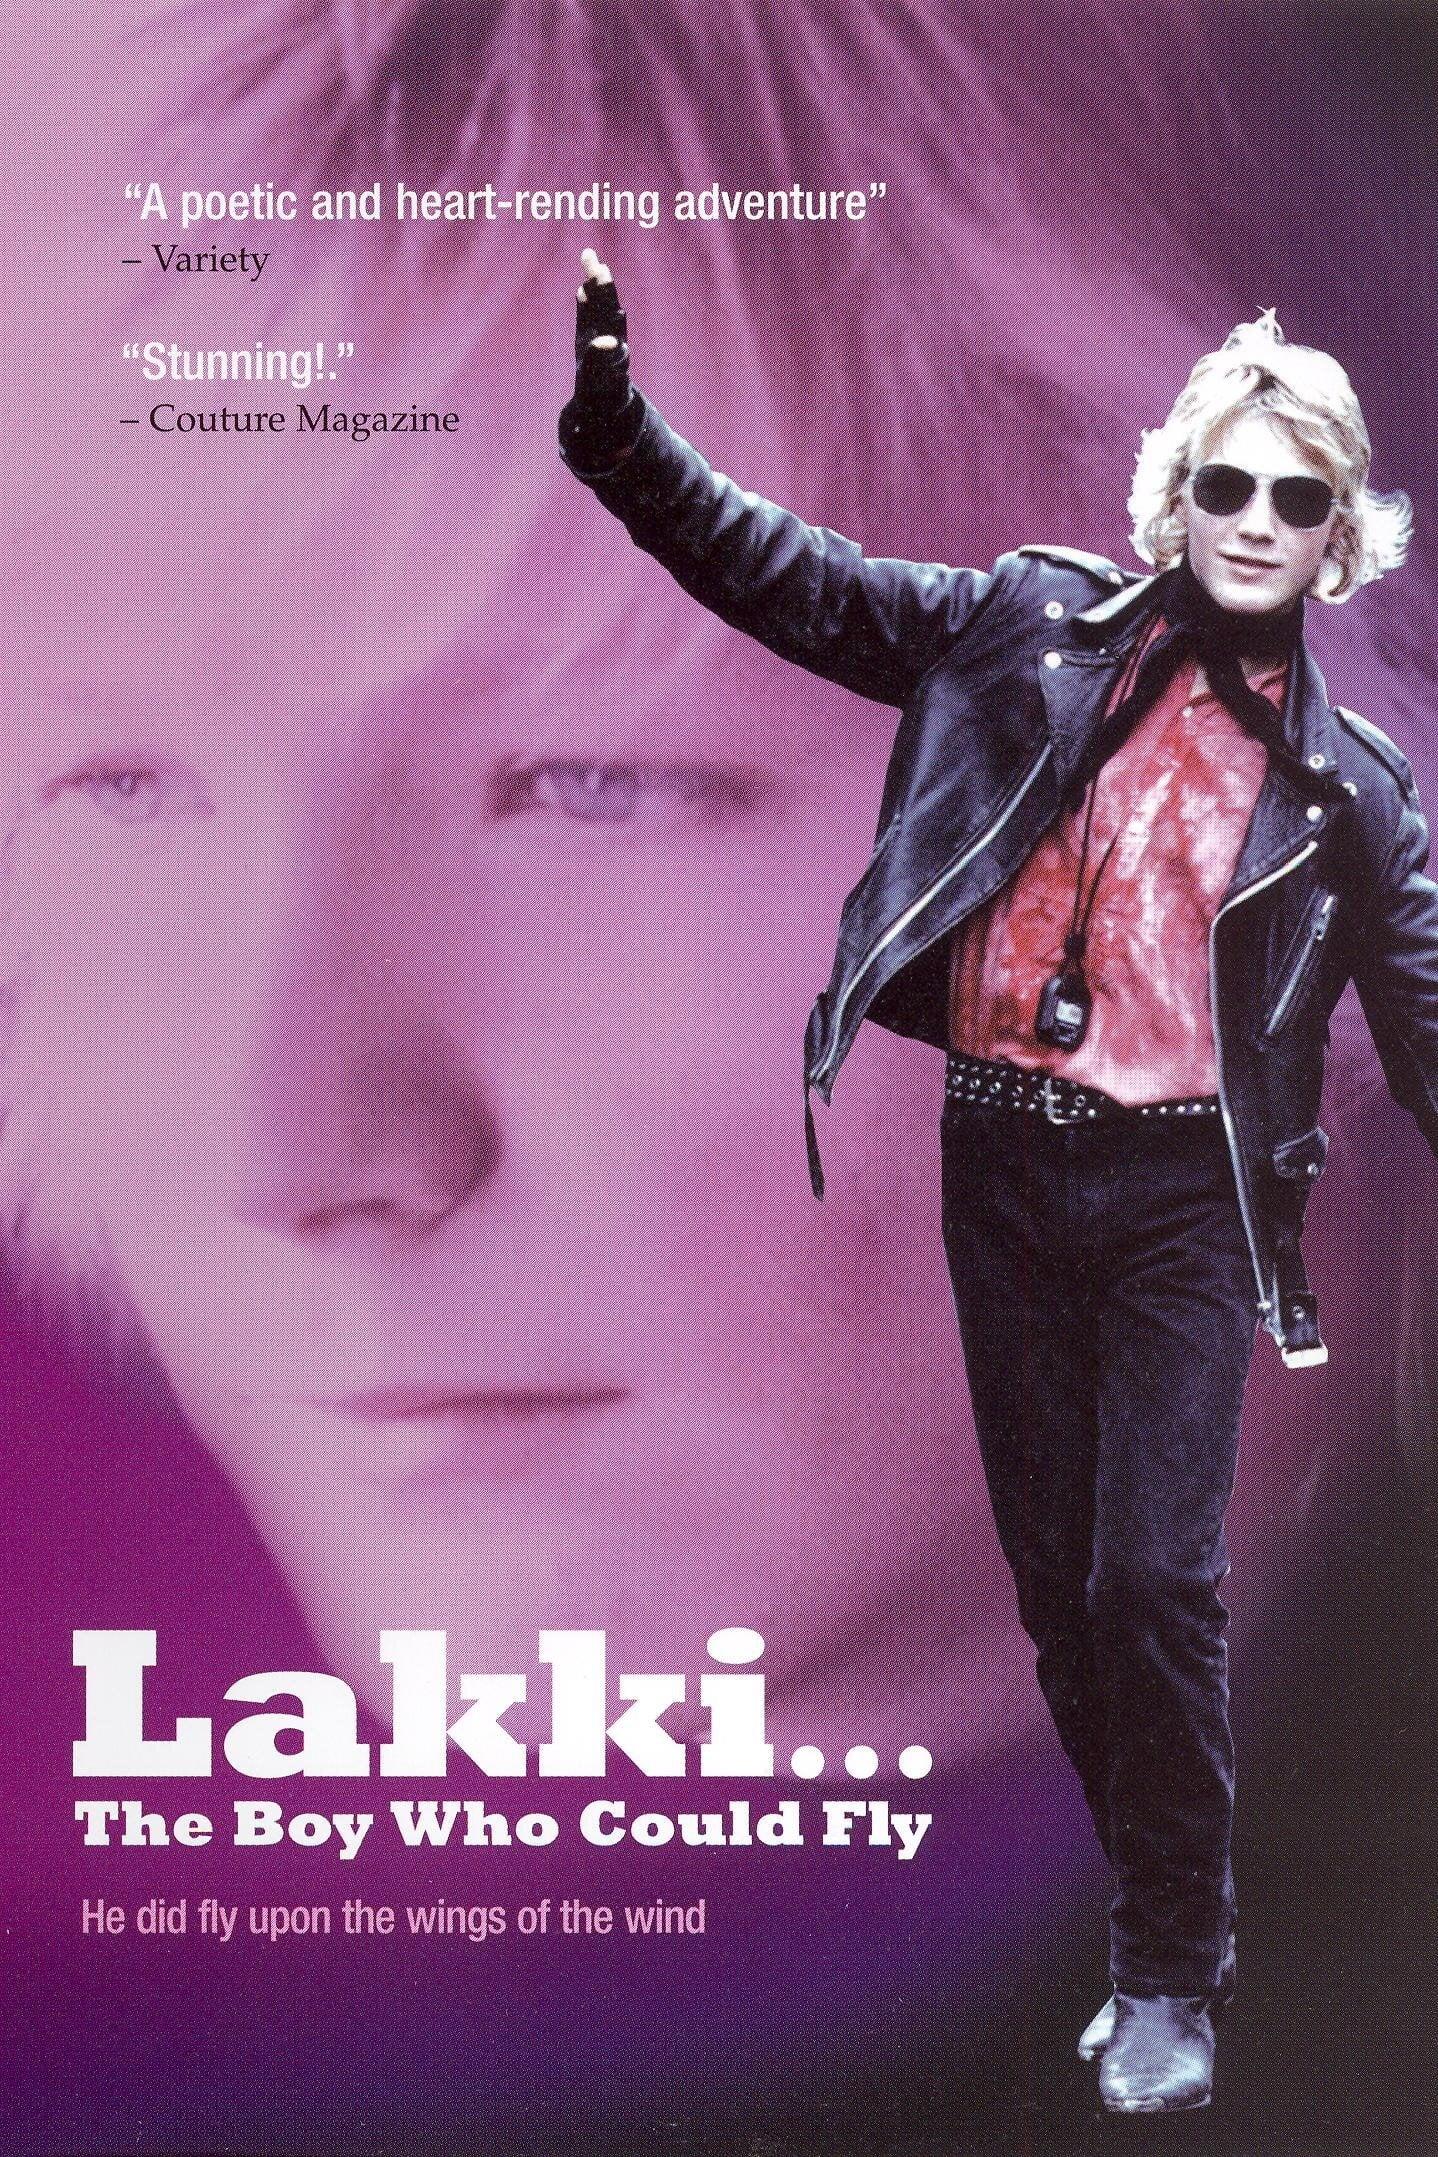 Lakki... The Boy Who Could Fly poster